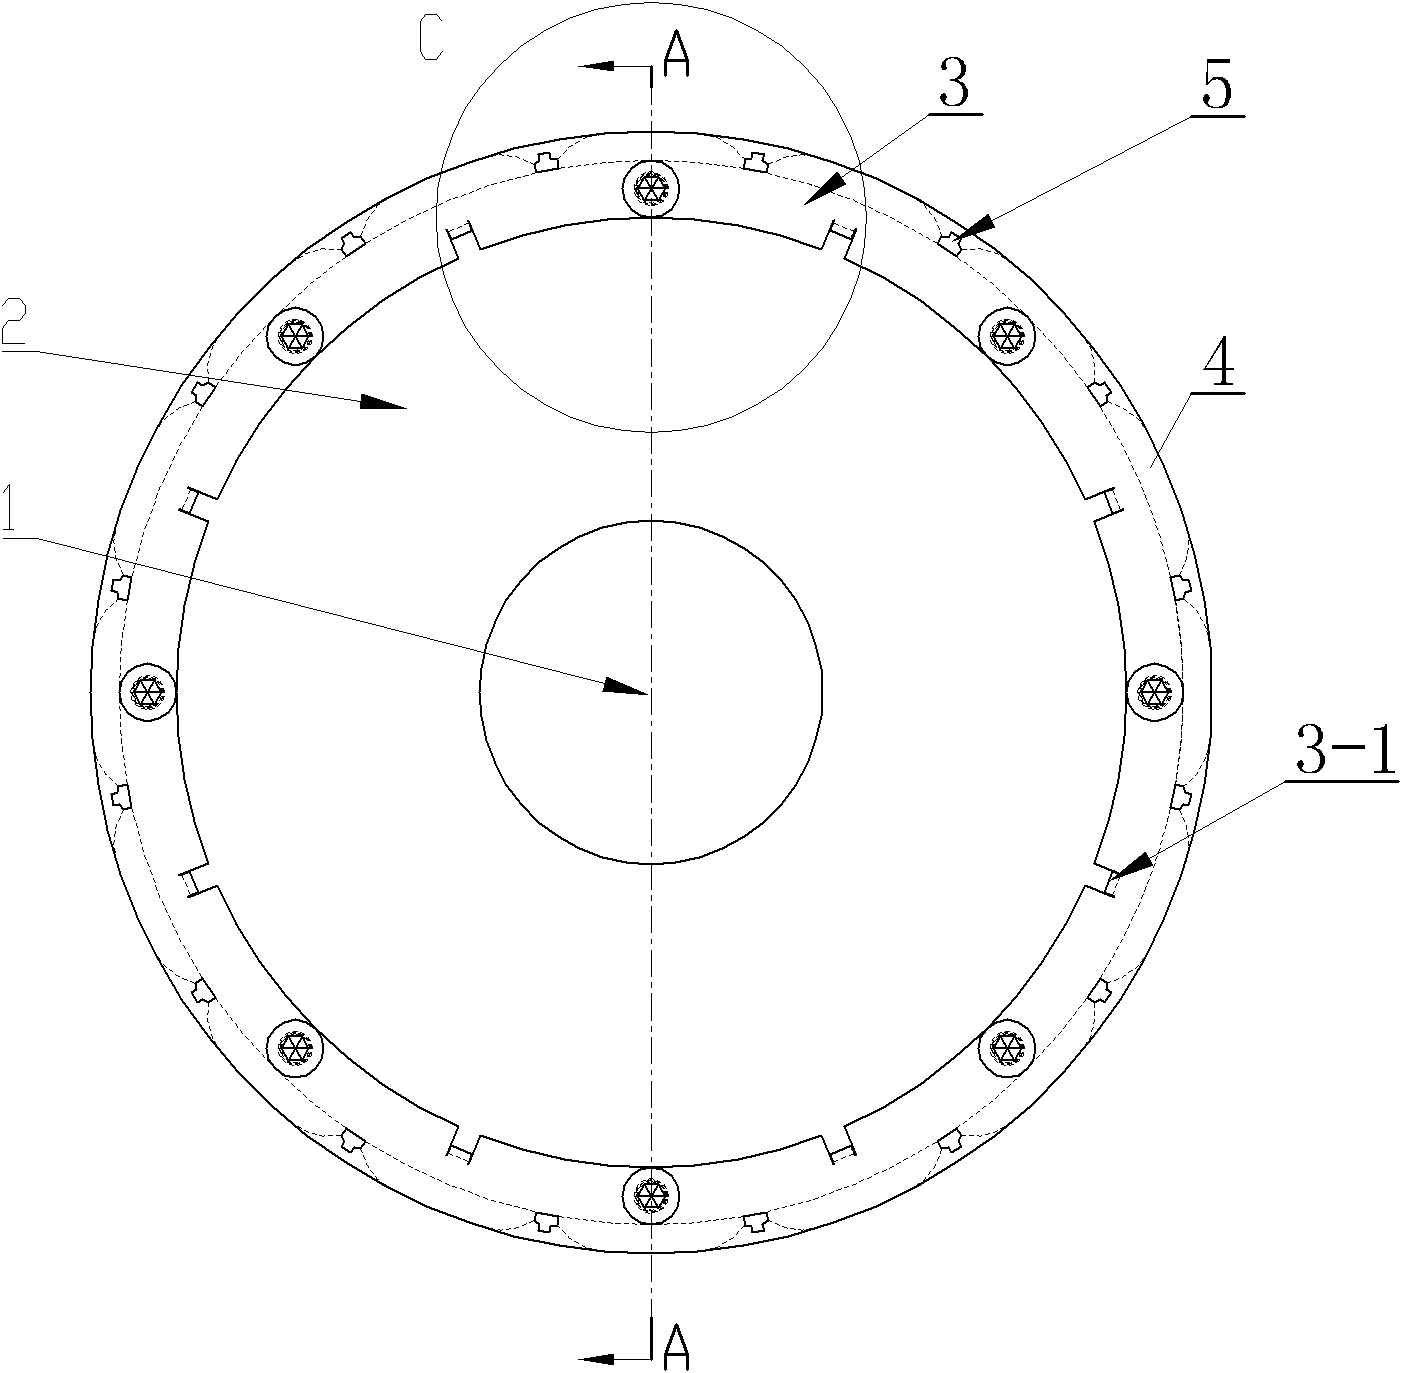 Structure for fixing magnetic poles of permanent magnet motor